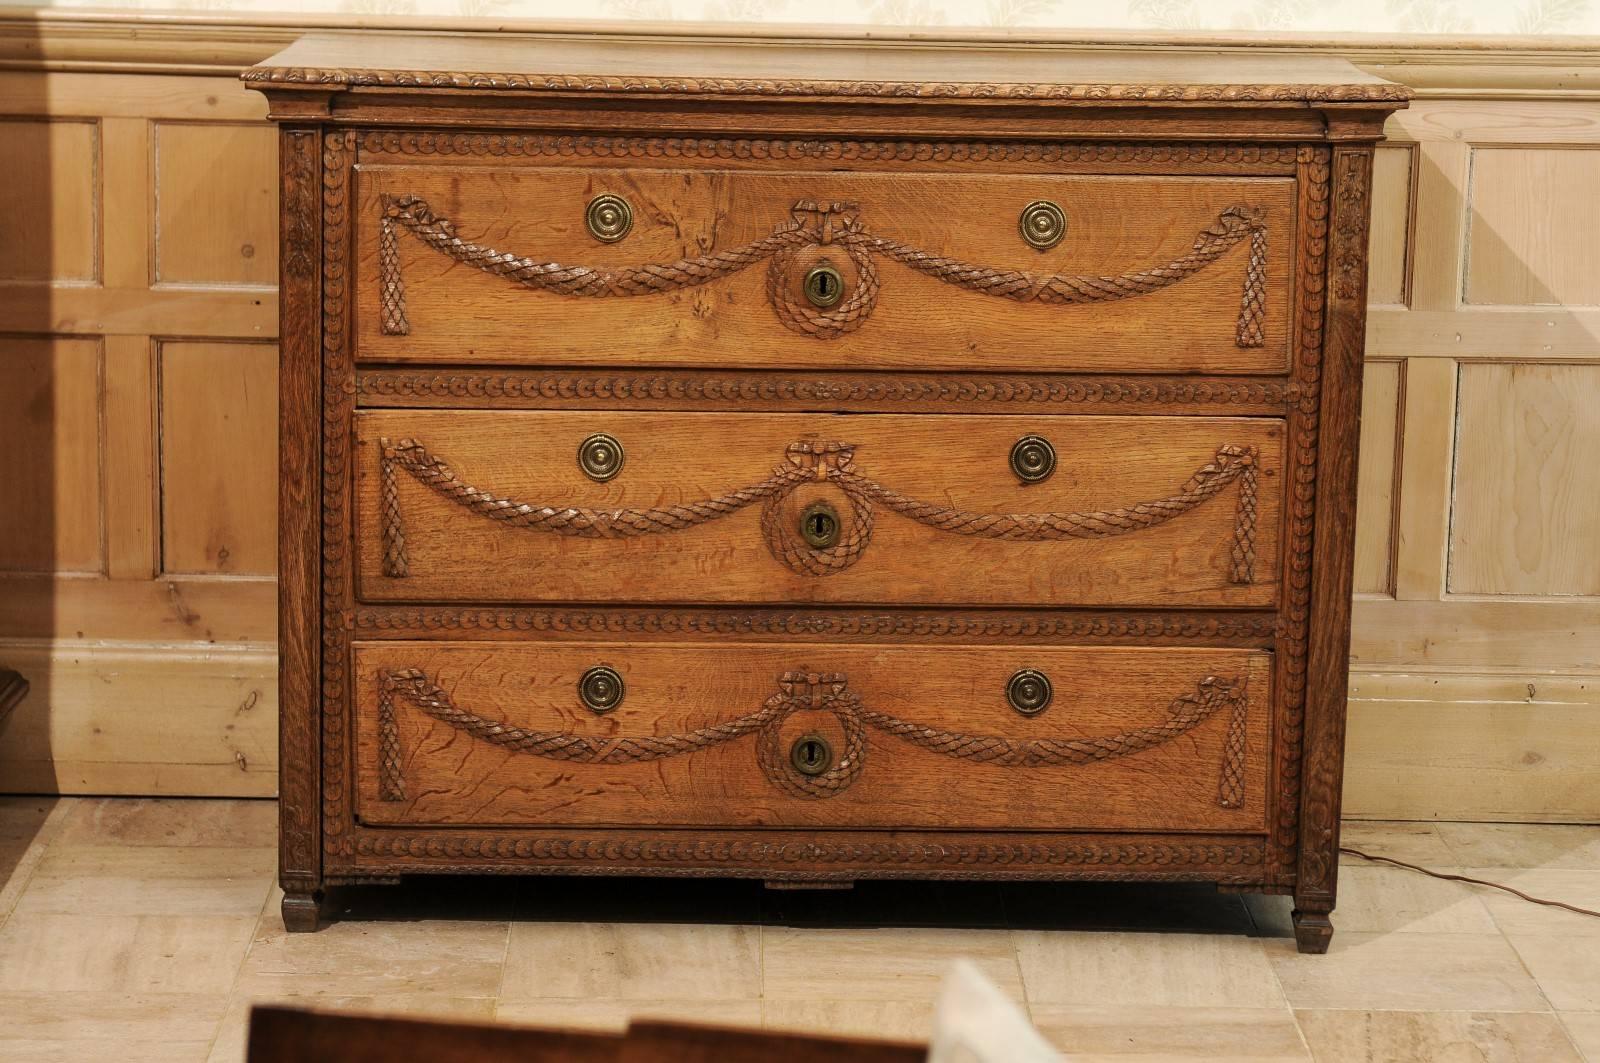 18th century Louis XVI commode, circa 1780
This finely carved chest has garlands and wreaths adorning it's three drawers. The trim is carved as well. The drawers are very functional and deep so they have good storage. The pulls are not original to